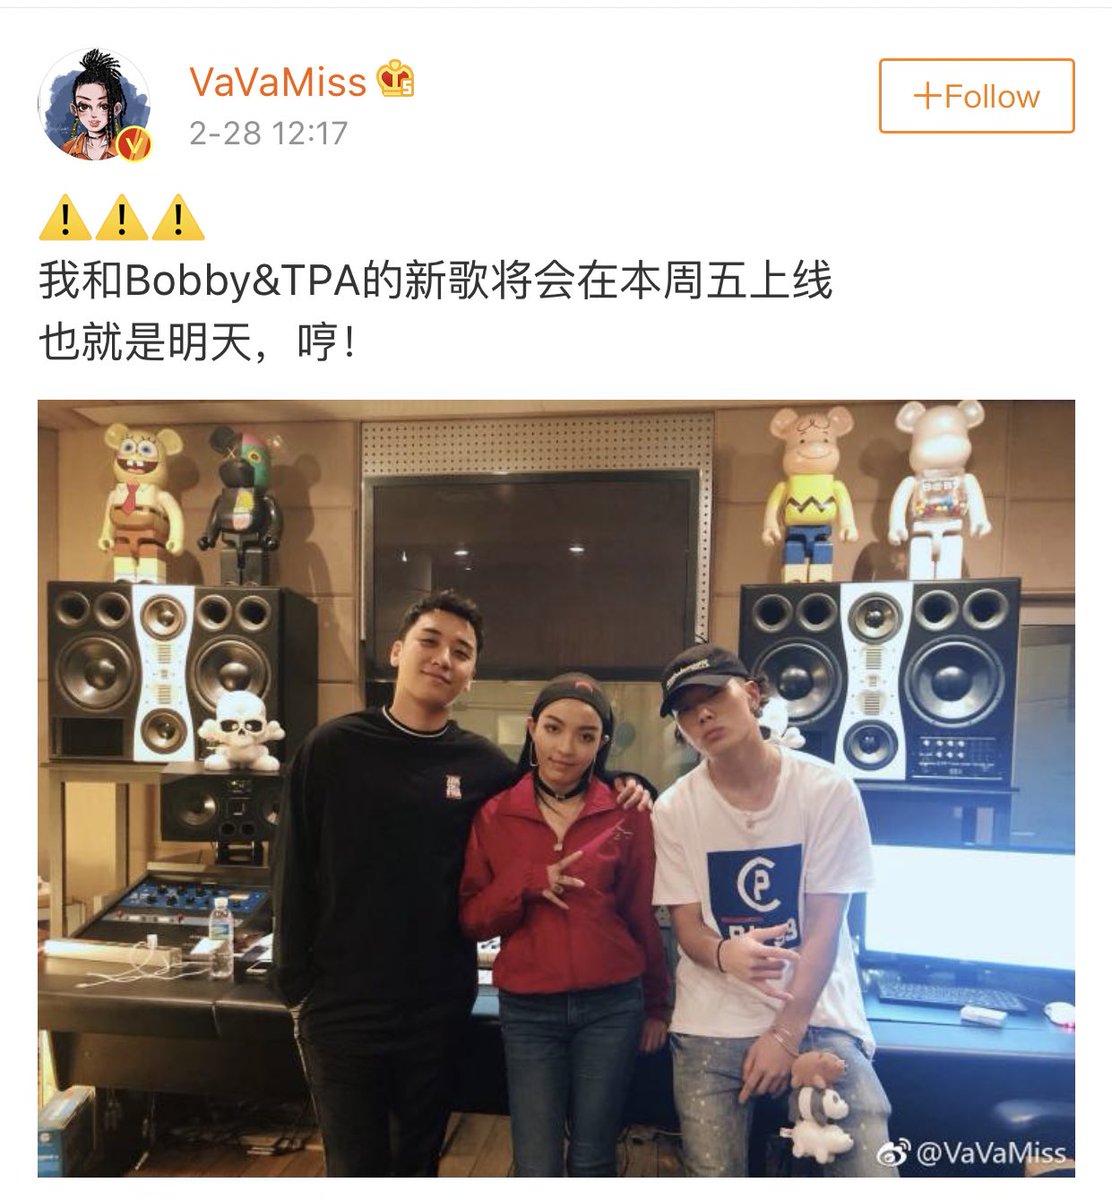 Chinese rapper VaVa and DJ TPA collabed with Bobbycr: VaVaMiss on Weibo ( https://m.weibo.cn/status/4344644634437447)Source : House of iKON #iKON  #아이콘  @YG_iKONIC